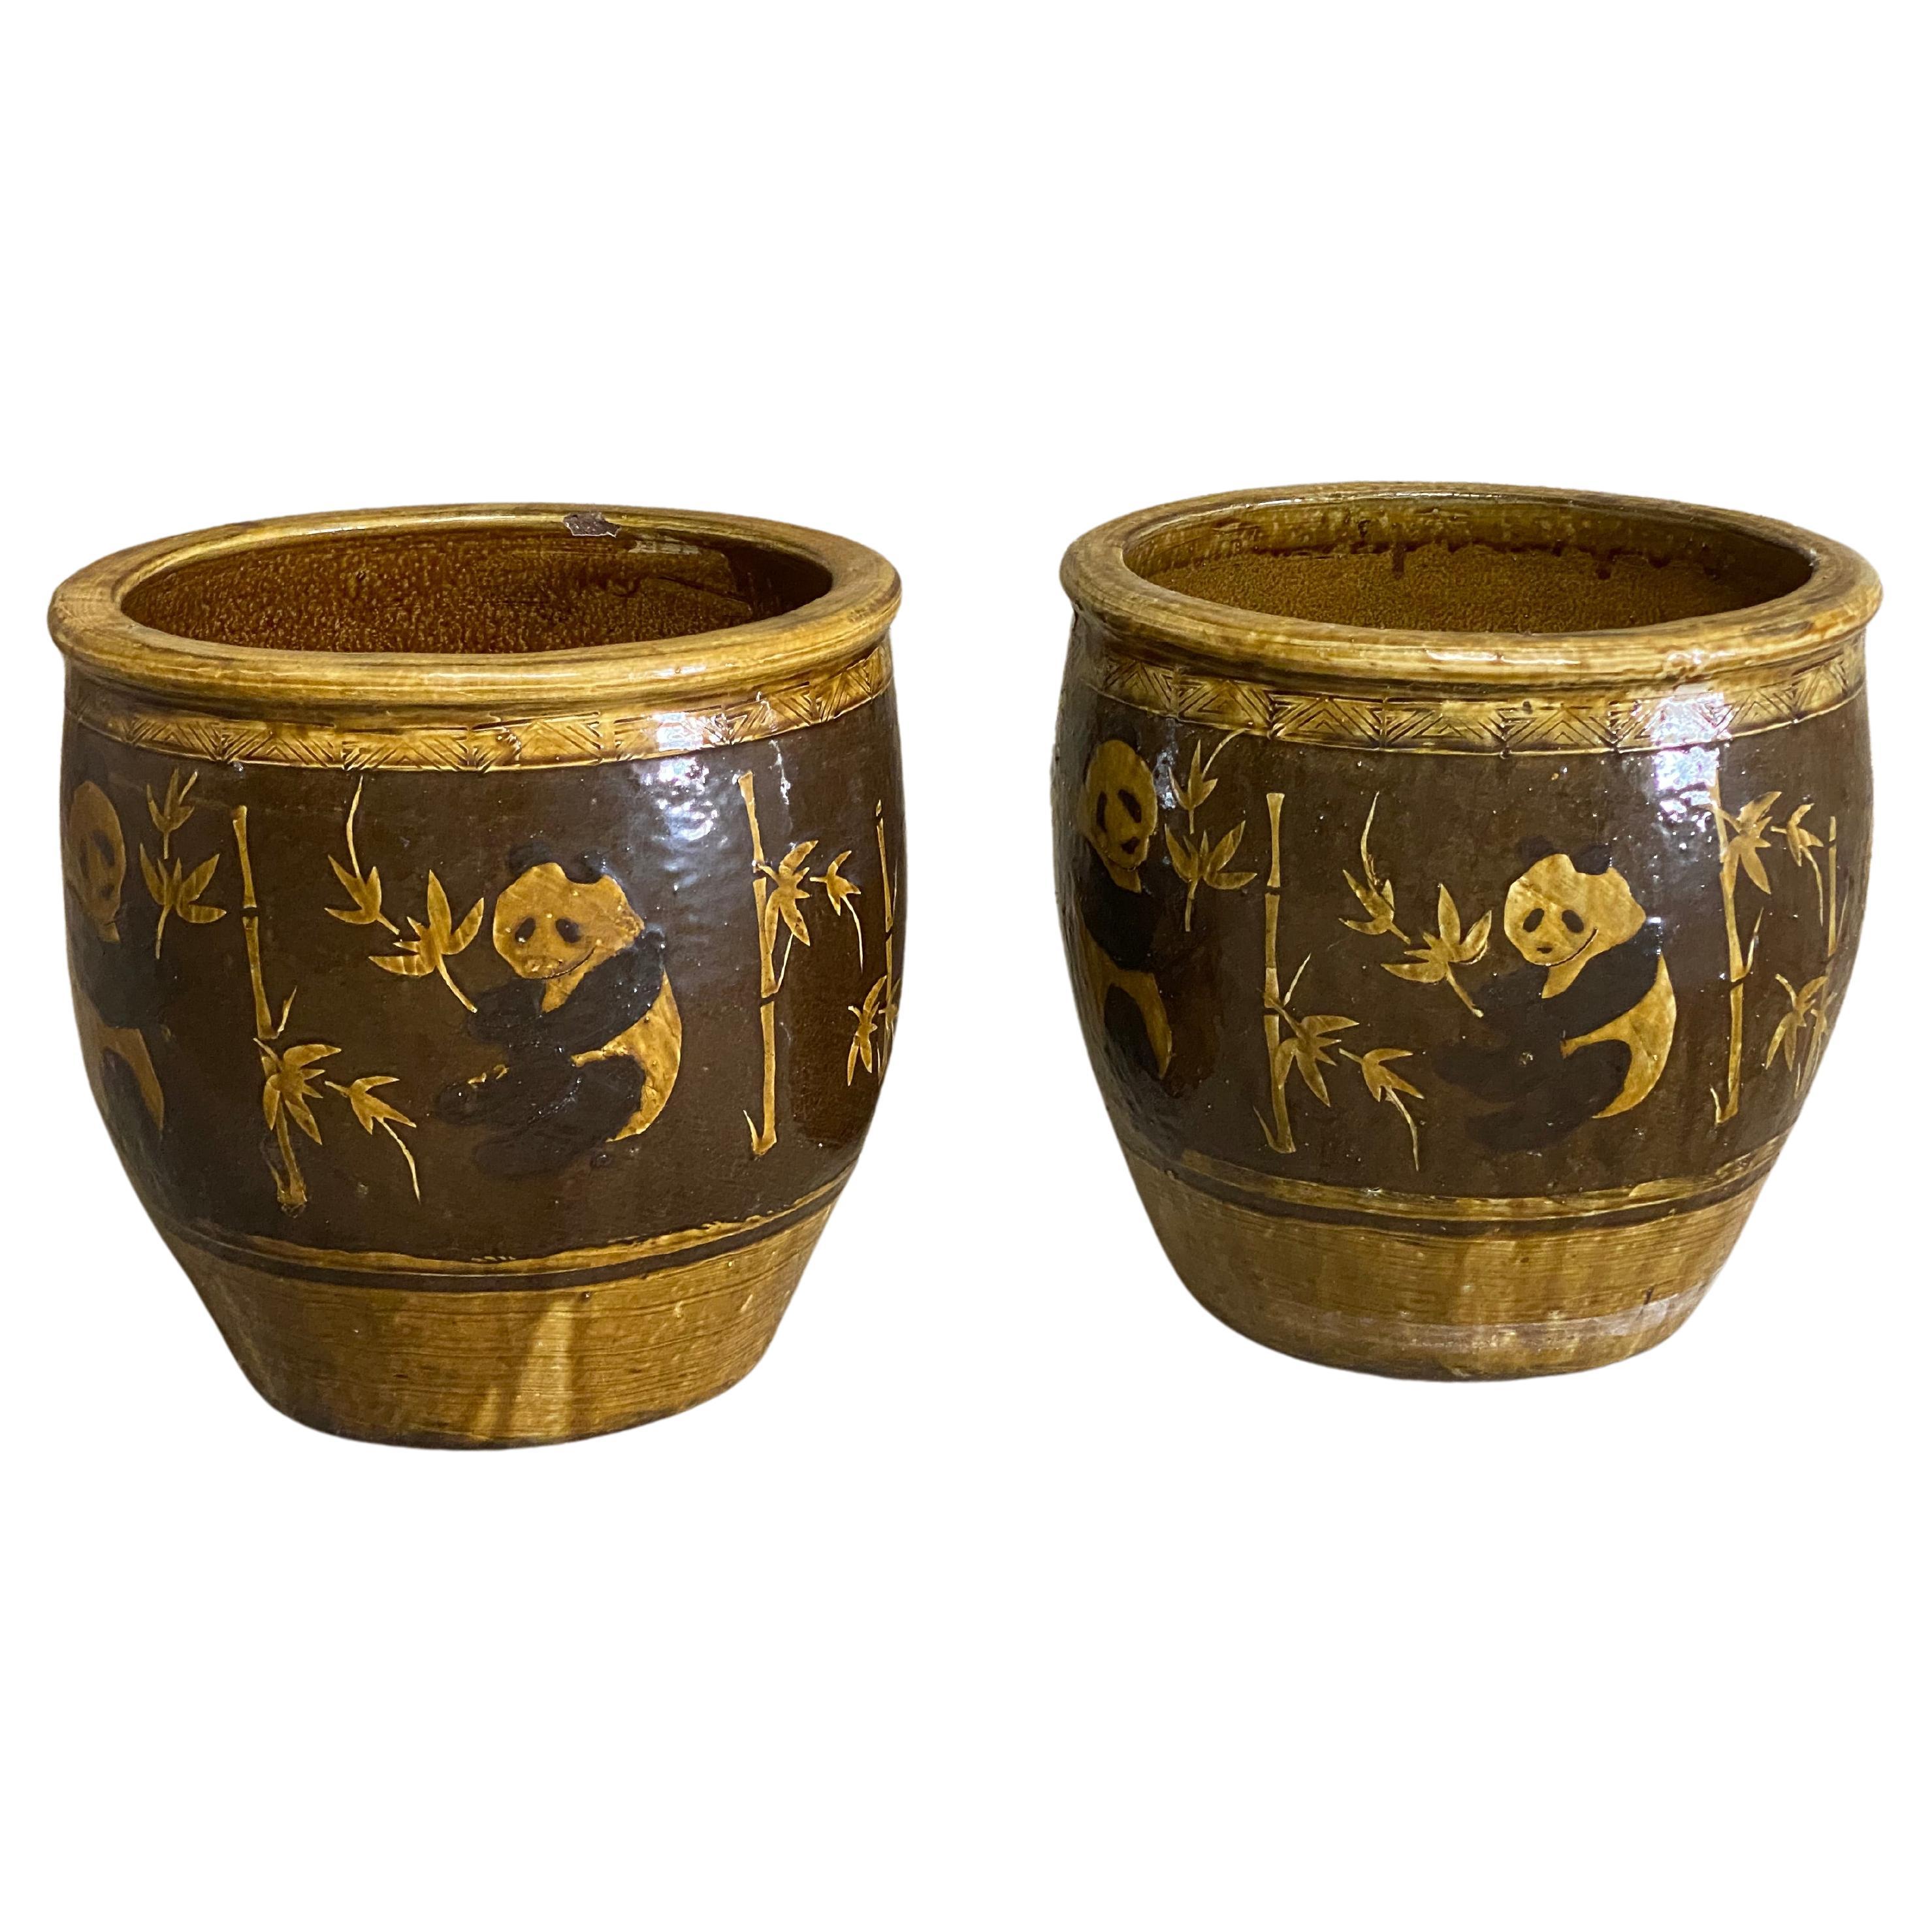 A pair of beautiful and large Chinese standard glazed panda bear and bamboo decorated red clay planters. Circa 1970-80. Both pots are hand decorated in the round of lovable and cuddly panda bears in various positions. Geometric design on the rim